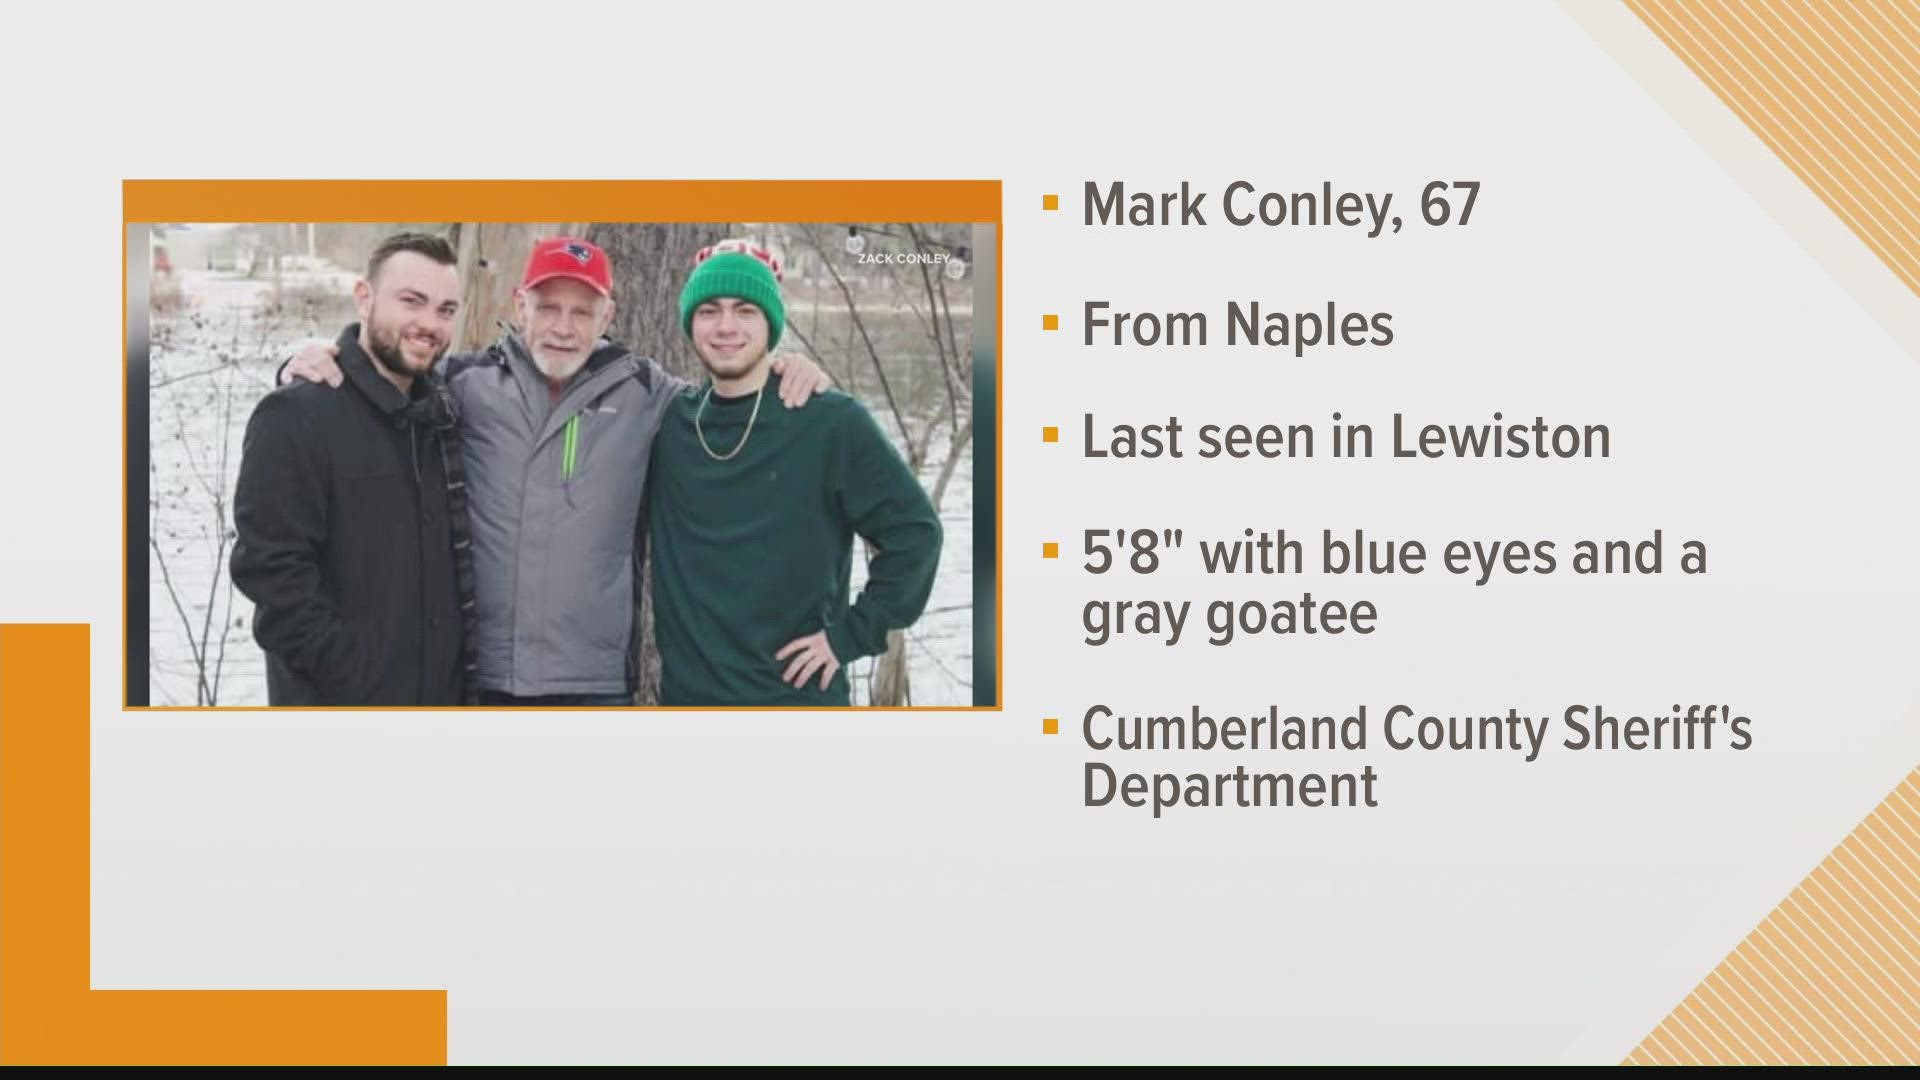 The Cumberland County Sheriff's Office is asking for help finding Mark Conley, who was last seen on Christmas Eve.